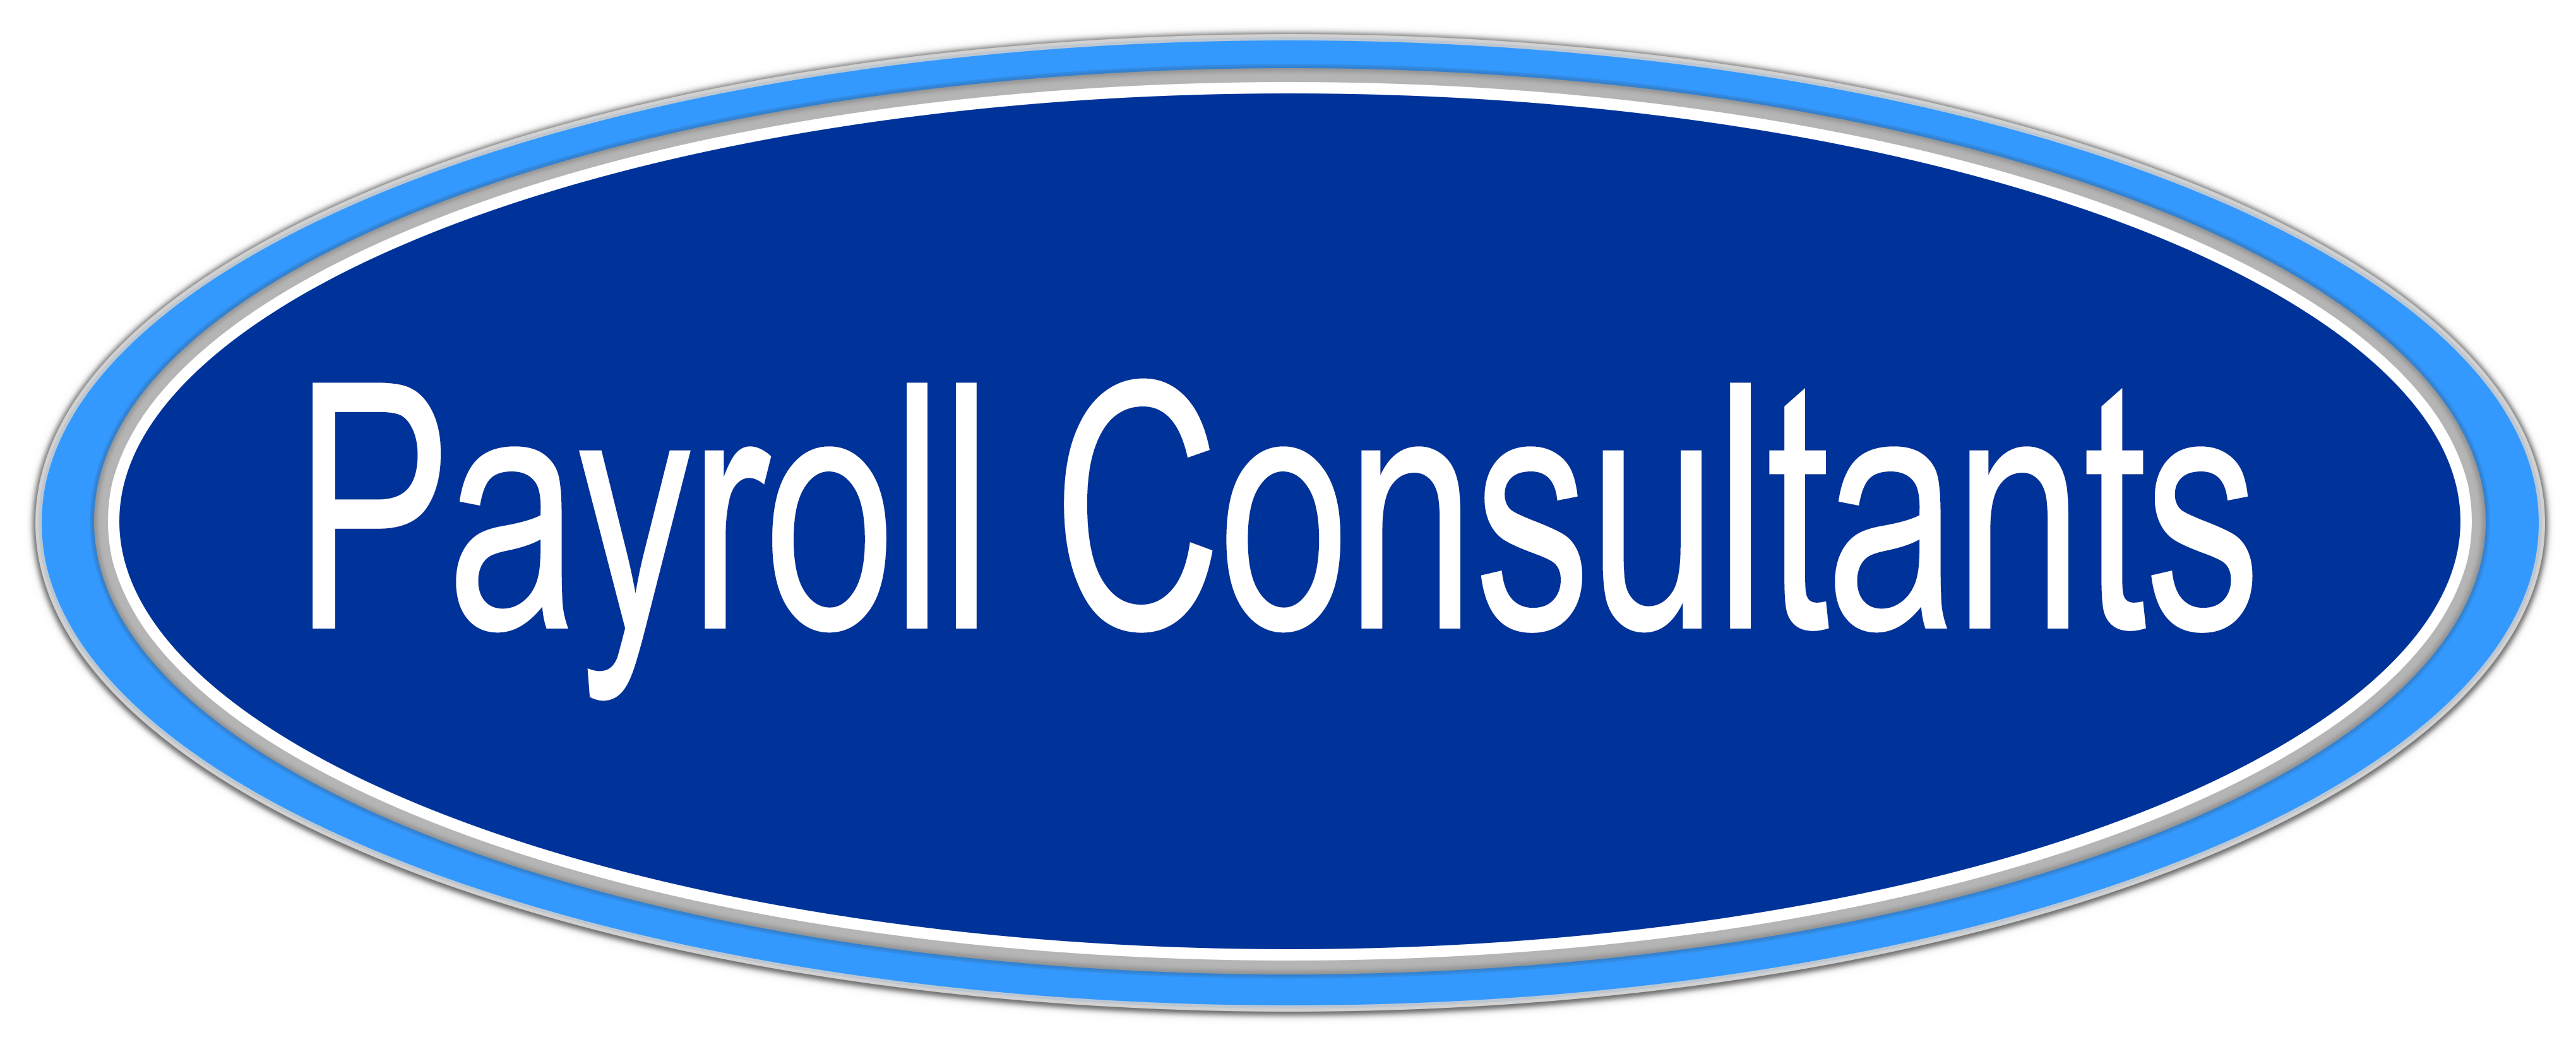 Workers Compensation Insurance Plans - Payroll Consultants